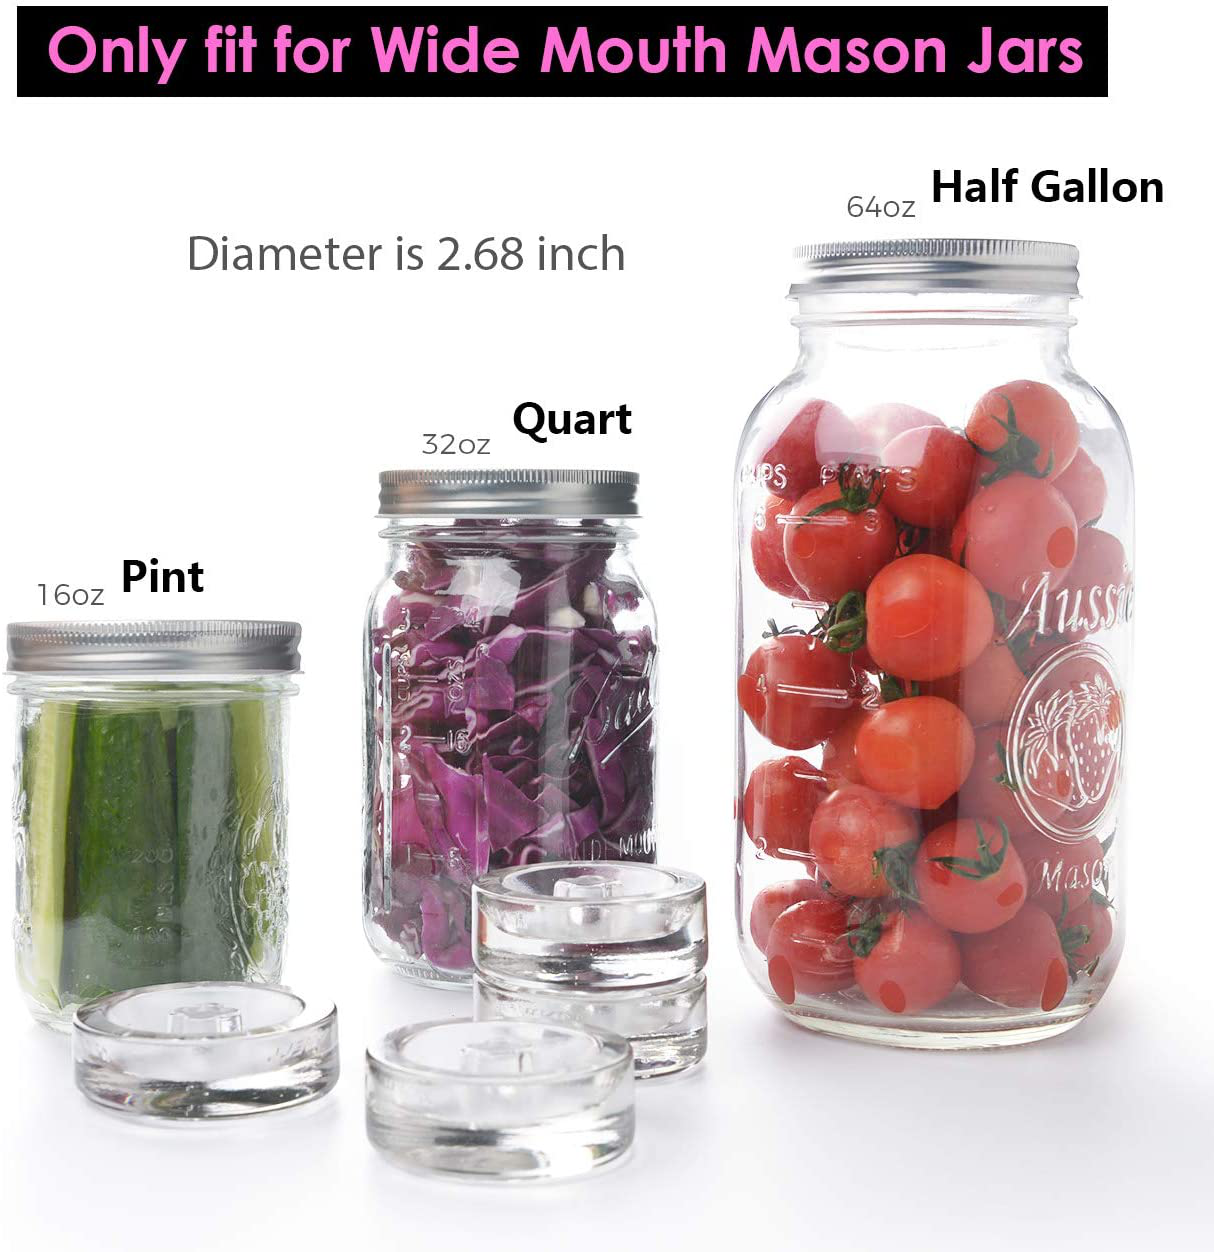 4-Pack Fermentation Glass Weights with Easy Grip Grooved Handles Heavy Fermenting Lids Fermentation Kit for Any Wide Mouth Mason Jars